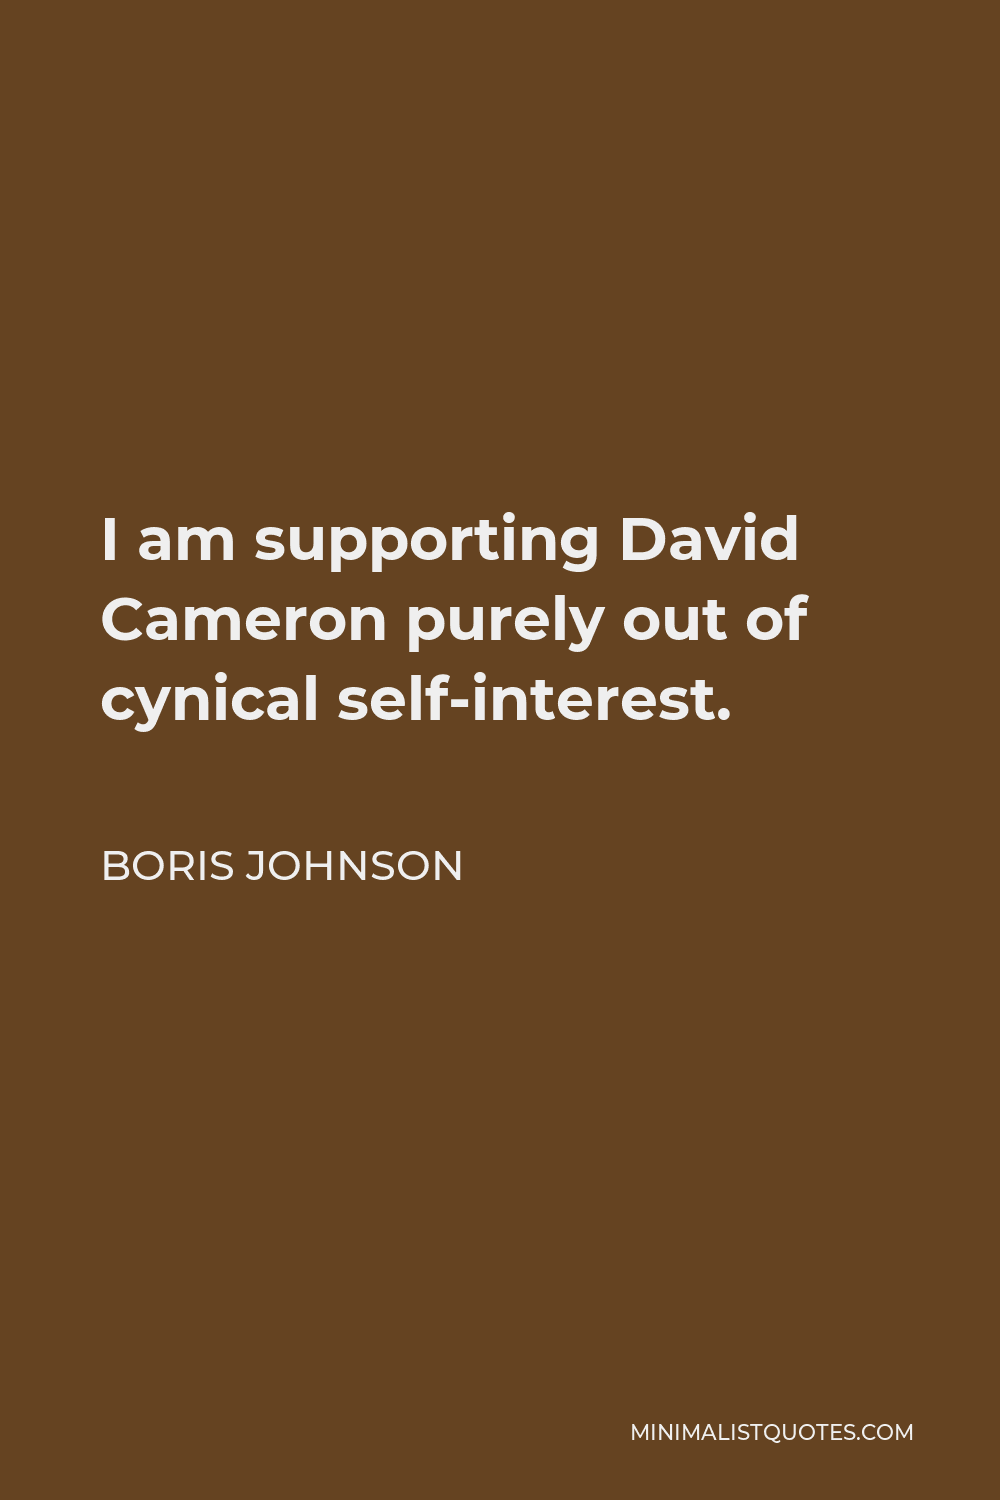 Boris Johnson Quote - I am supporting David Cameron purely out of cynical self-interest.